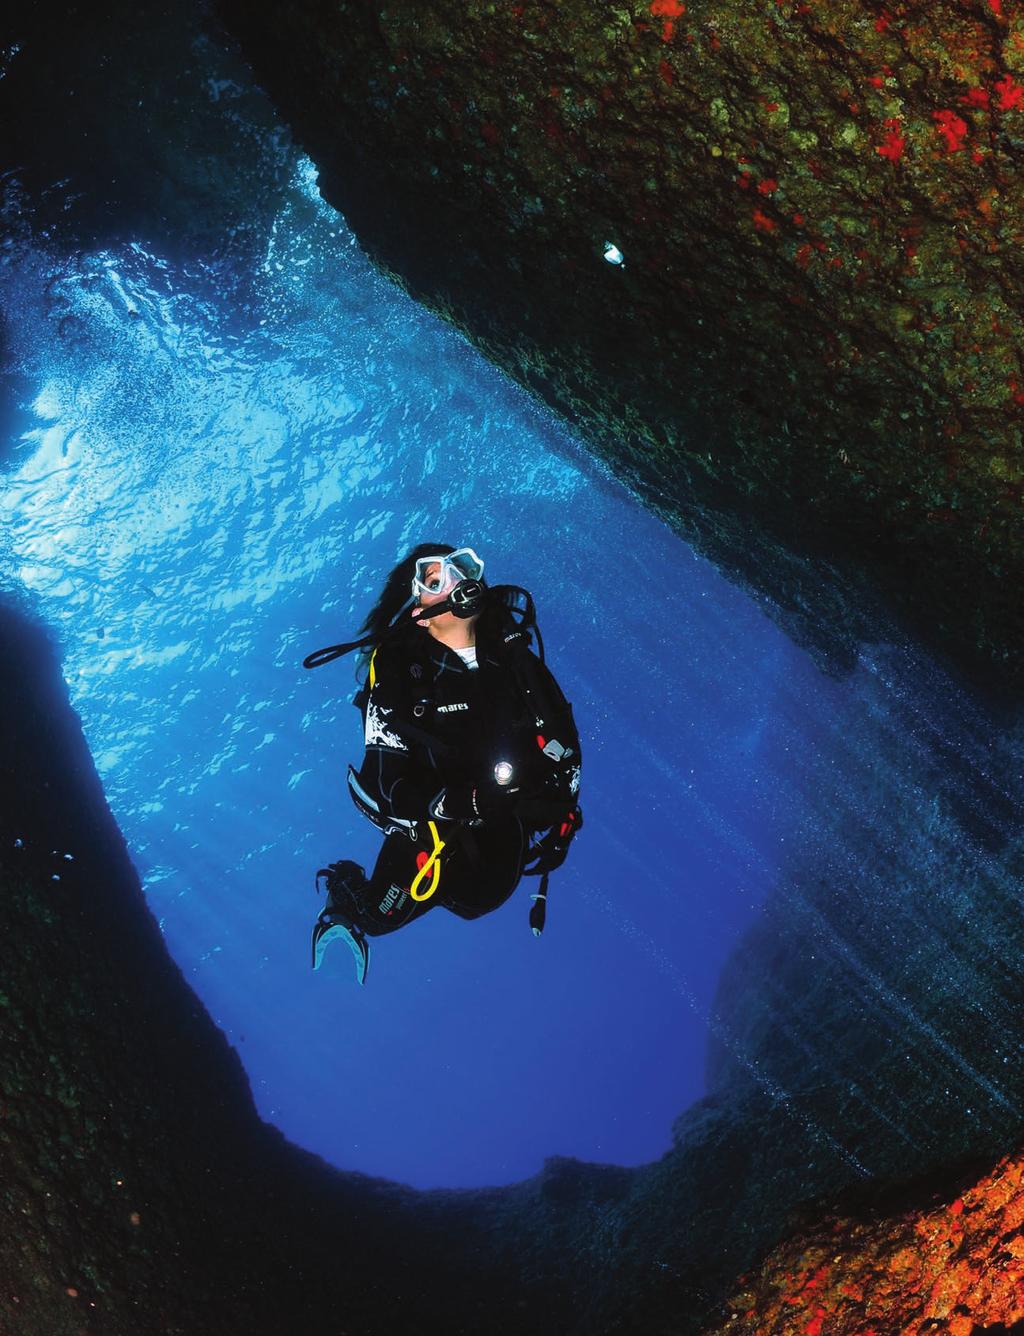 Dive HQ Westhaven offers Diploma students interest free loans. We recommend having your own SCUBA gear.